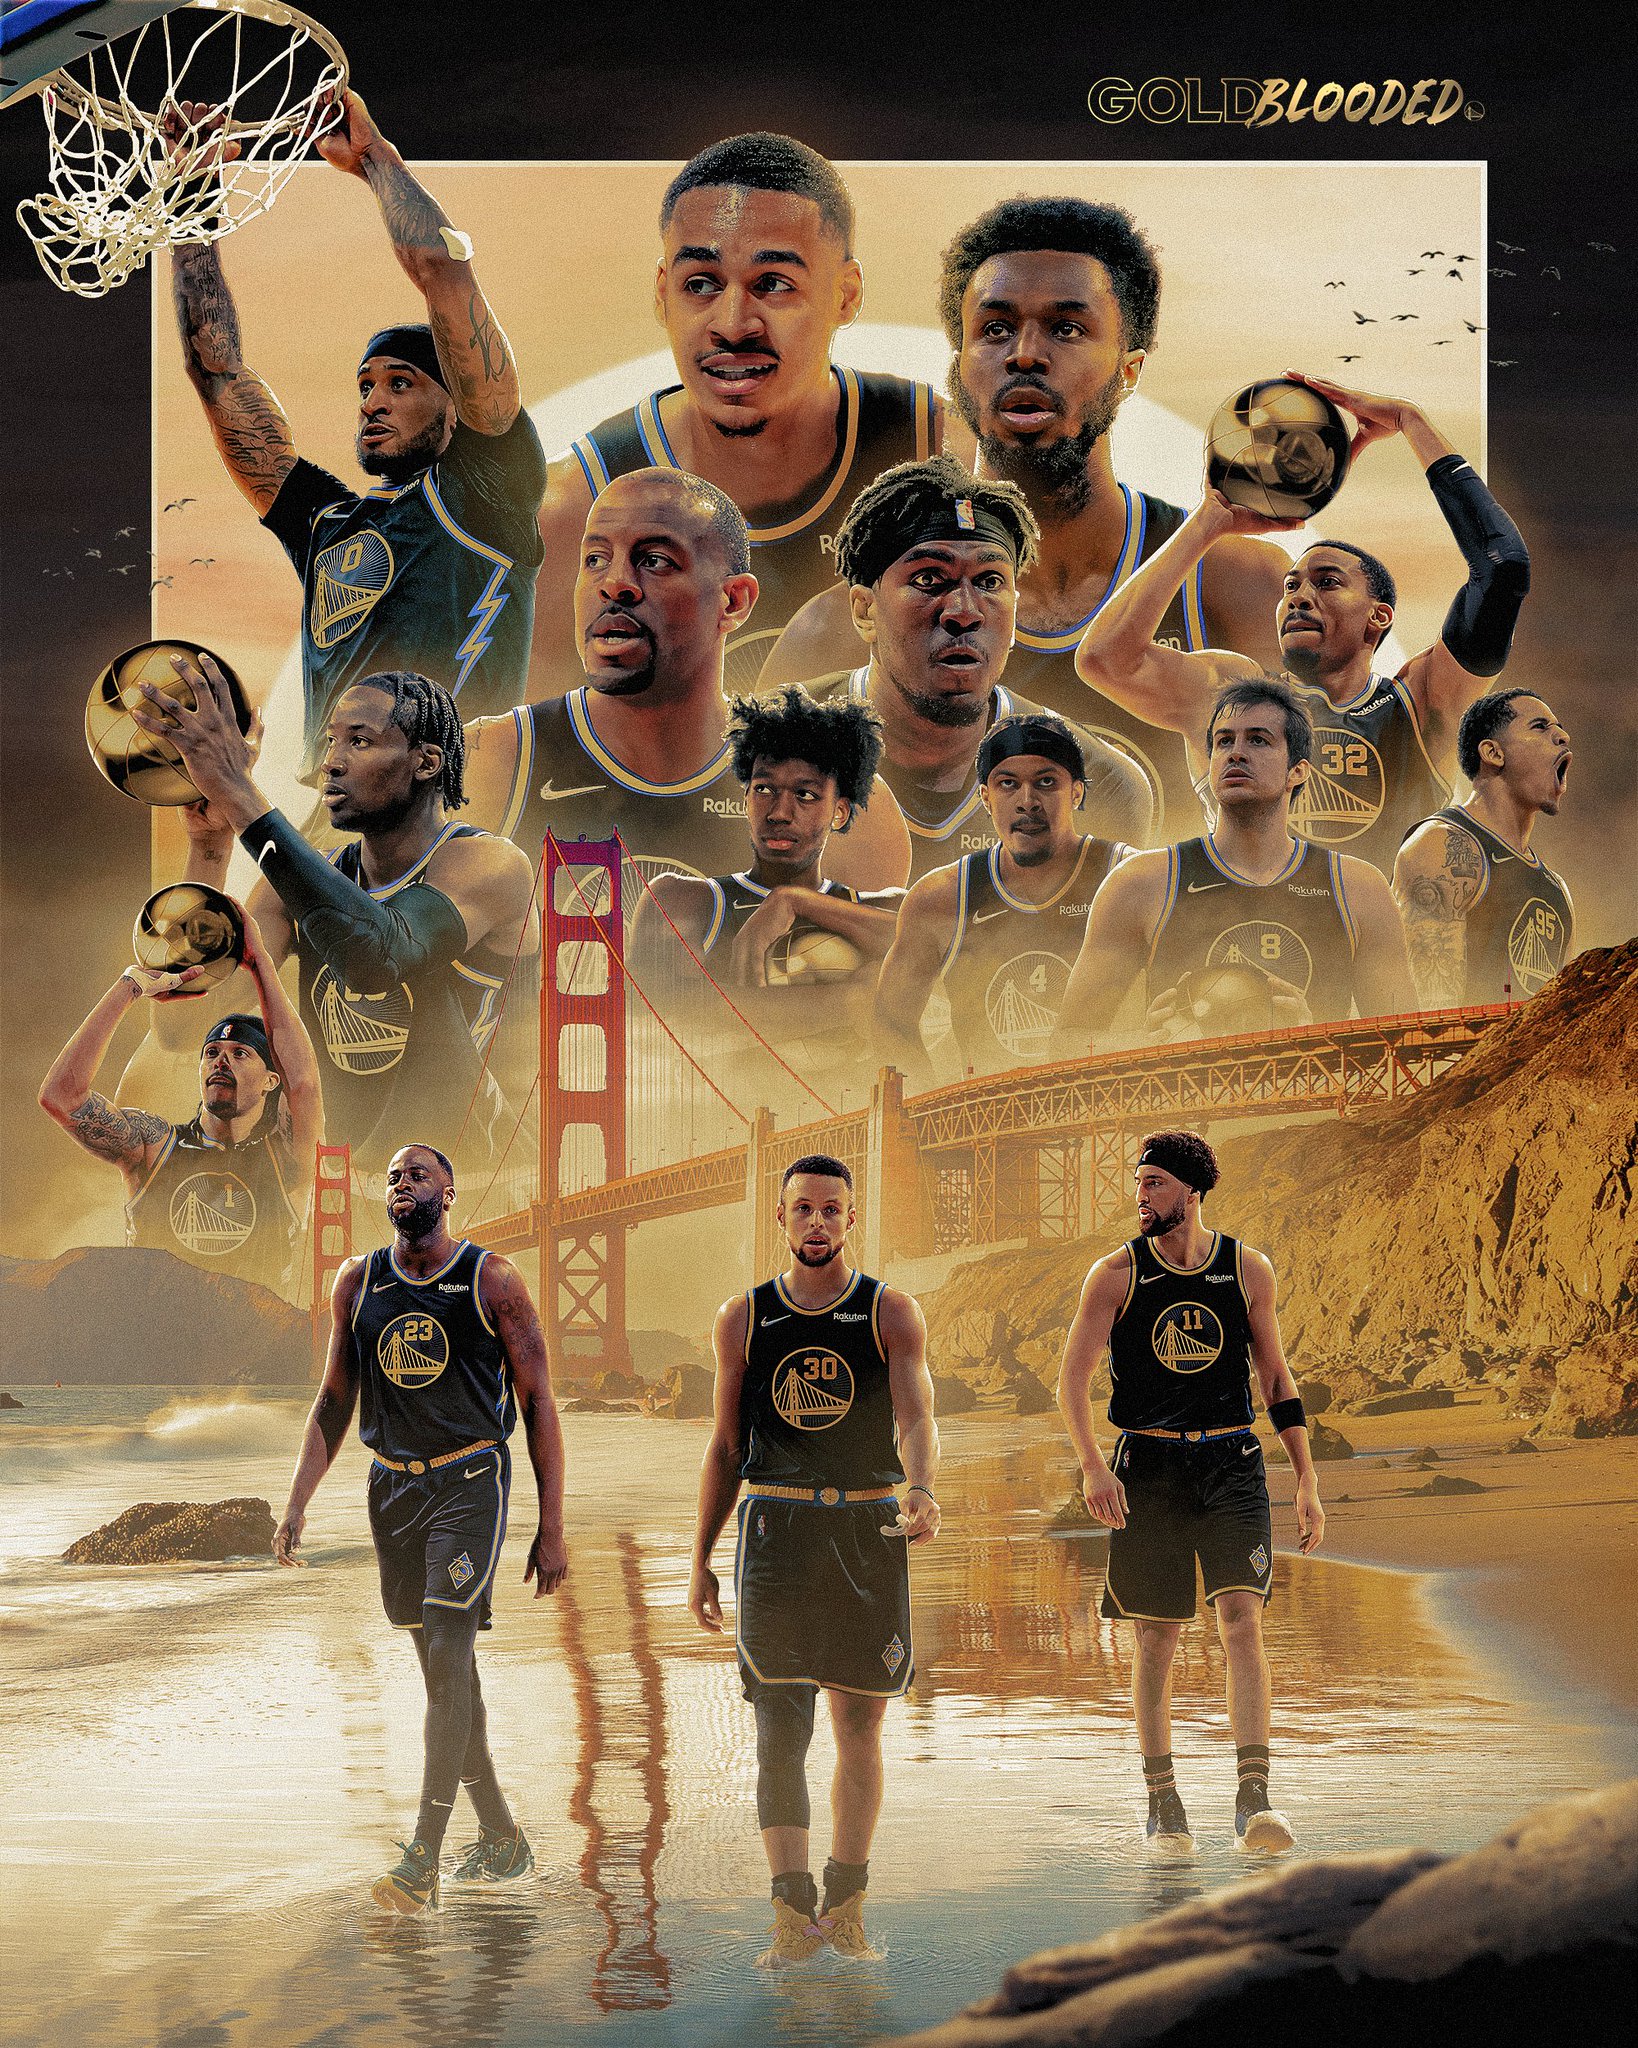 Golden State Warriors, the next chapter in our journey begins. #GoldBlooded